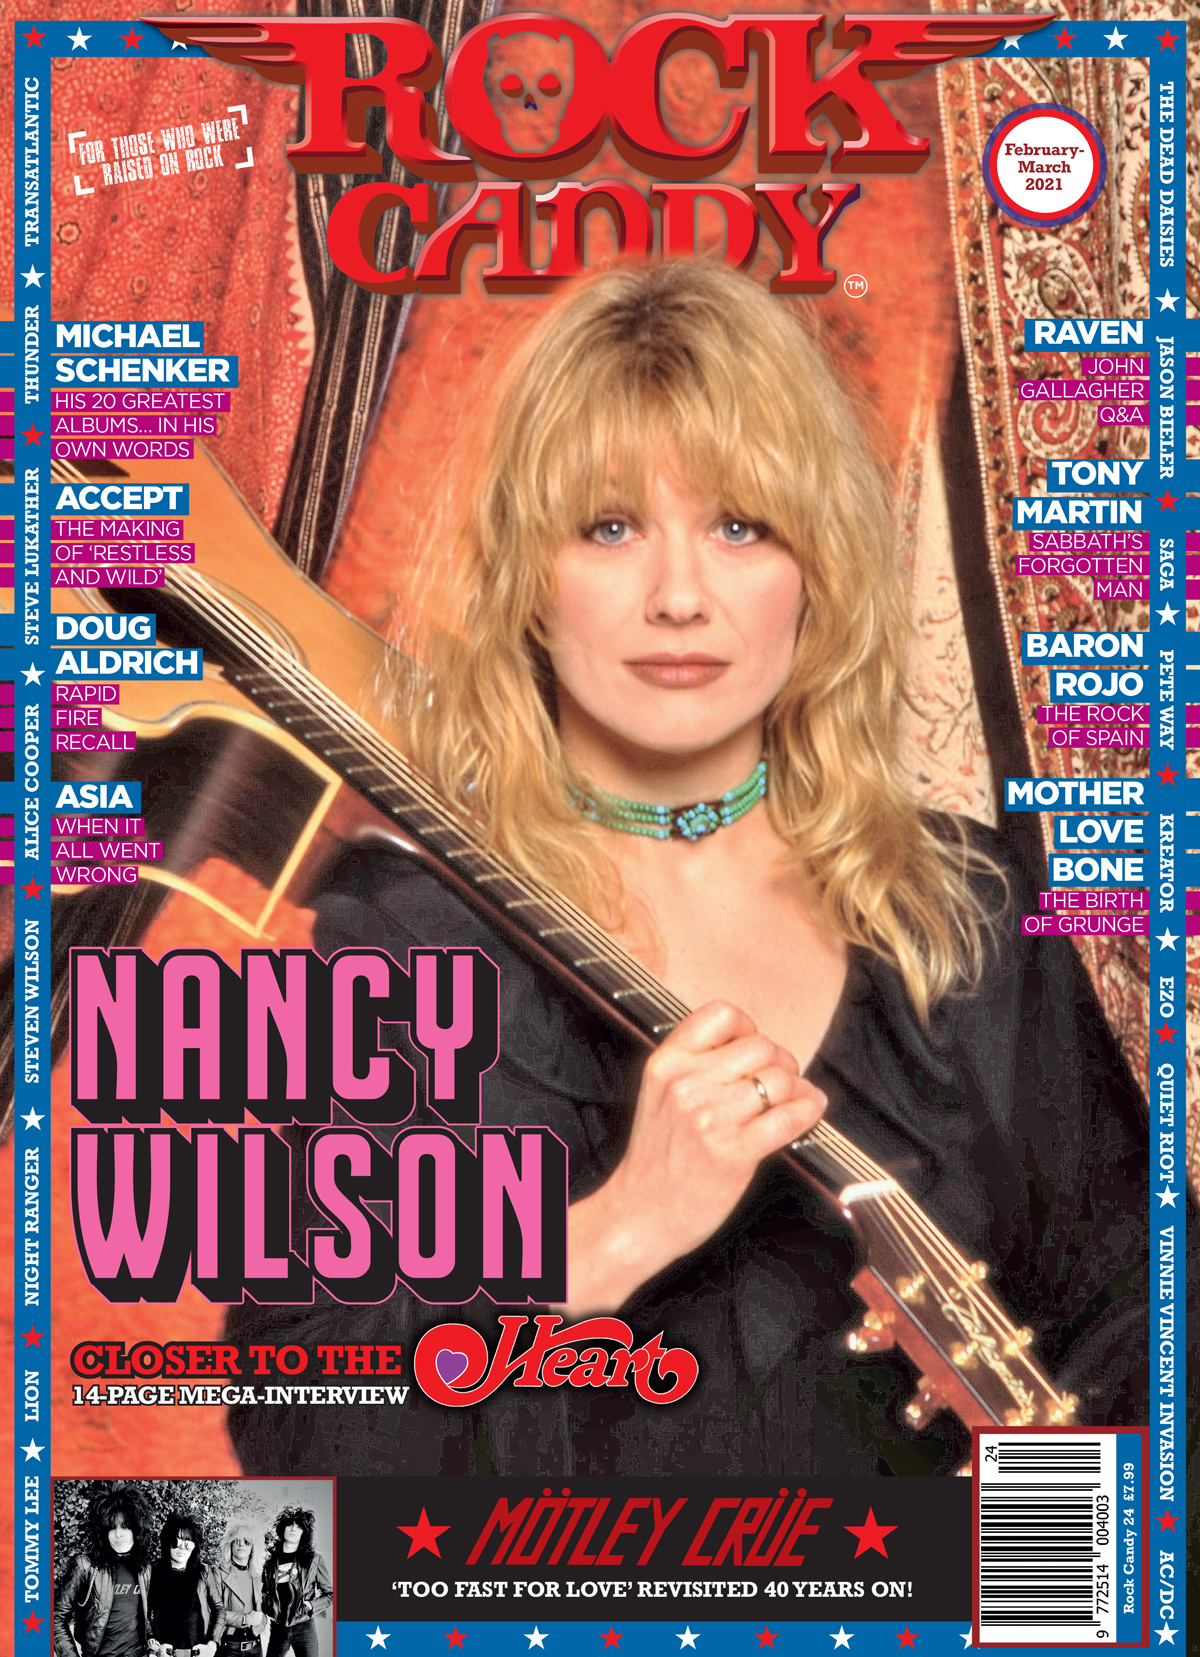 Issue 24 is available right now, featuring our 14-page cover story interview with Heart legend Nancy Wilson.